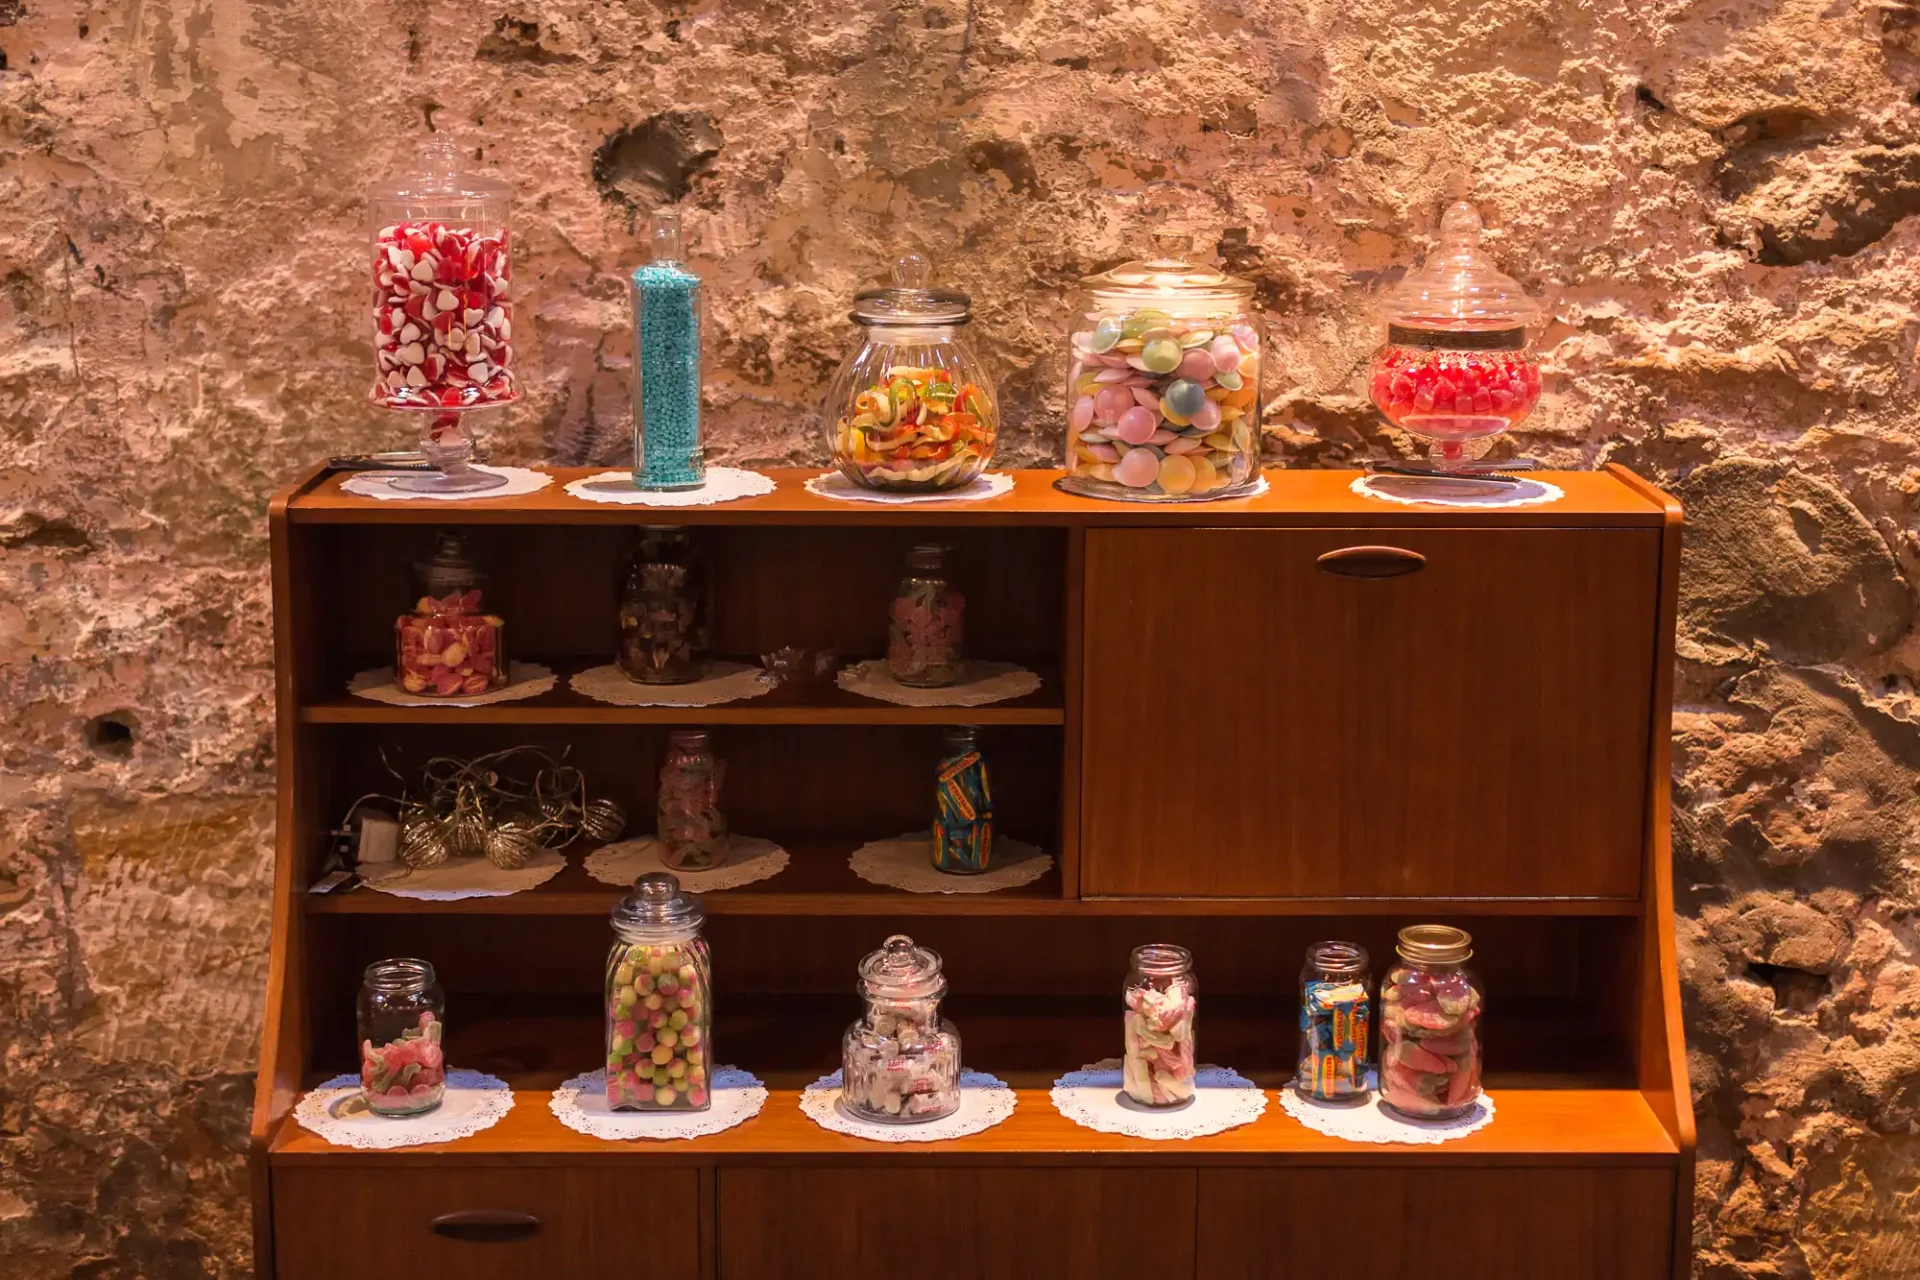 Various candies in glass jars displayed on a wooden shelf against a textured stone wall.